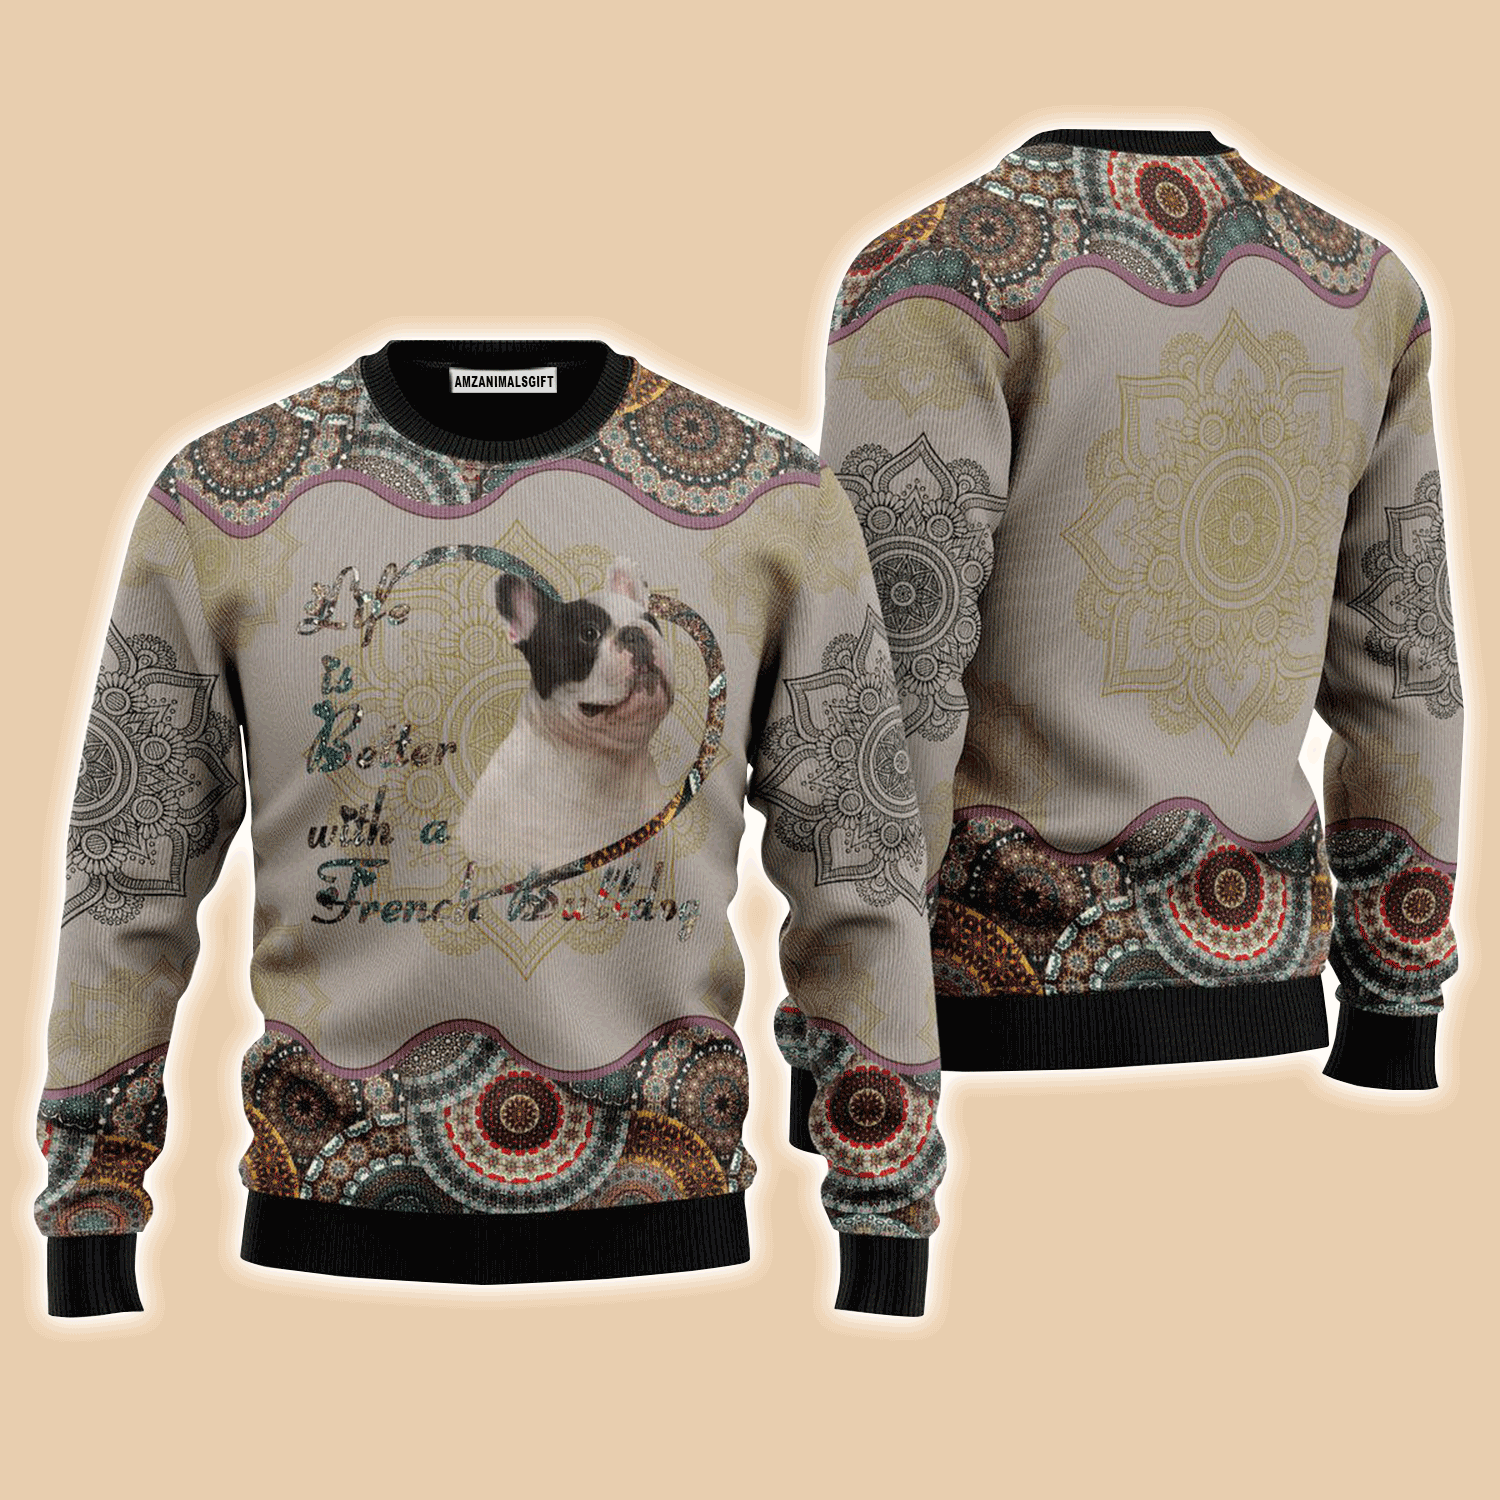 French Bulldog Dog Sweater Life Is Better With A French Bulldog, Ugly Sweater For Men & Women, Perfect Outfit For Christmas New Year Autumn Winter